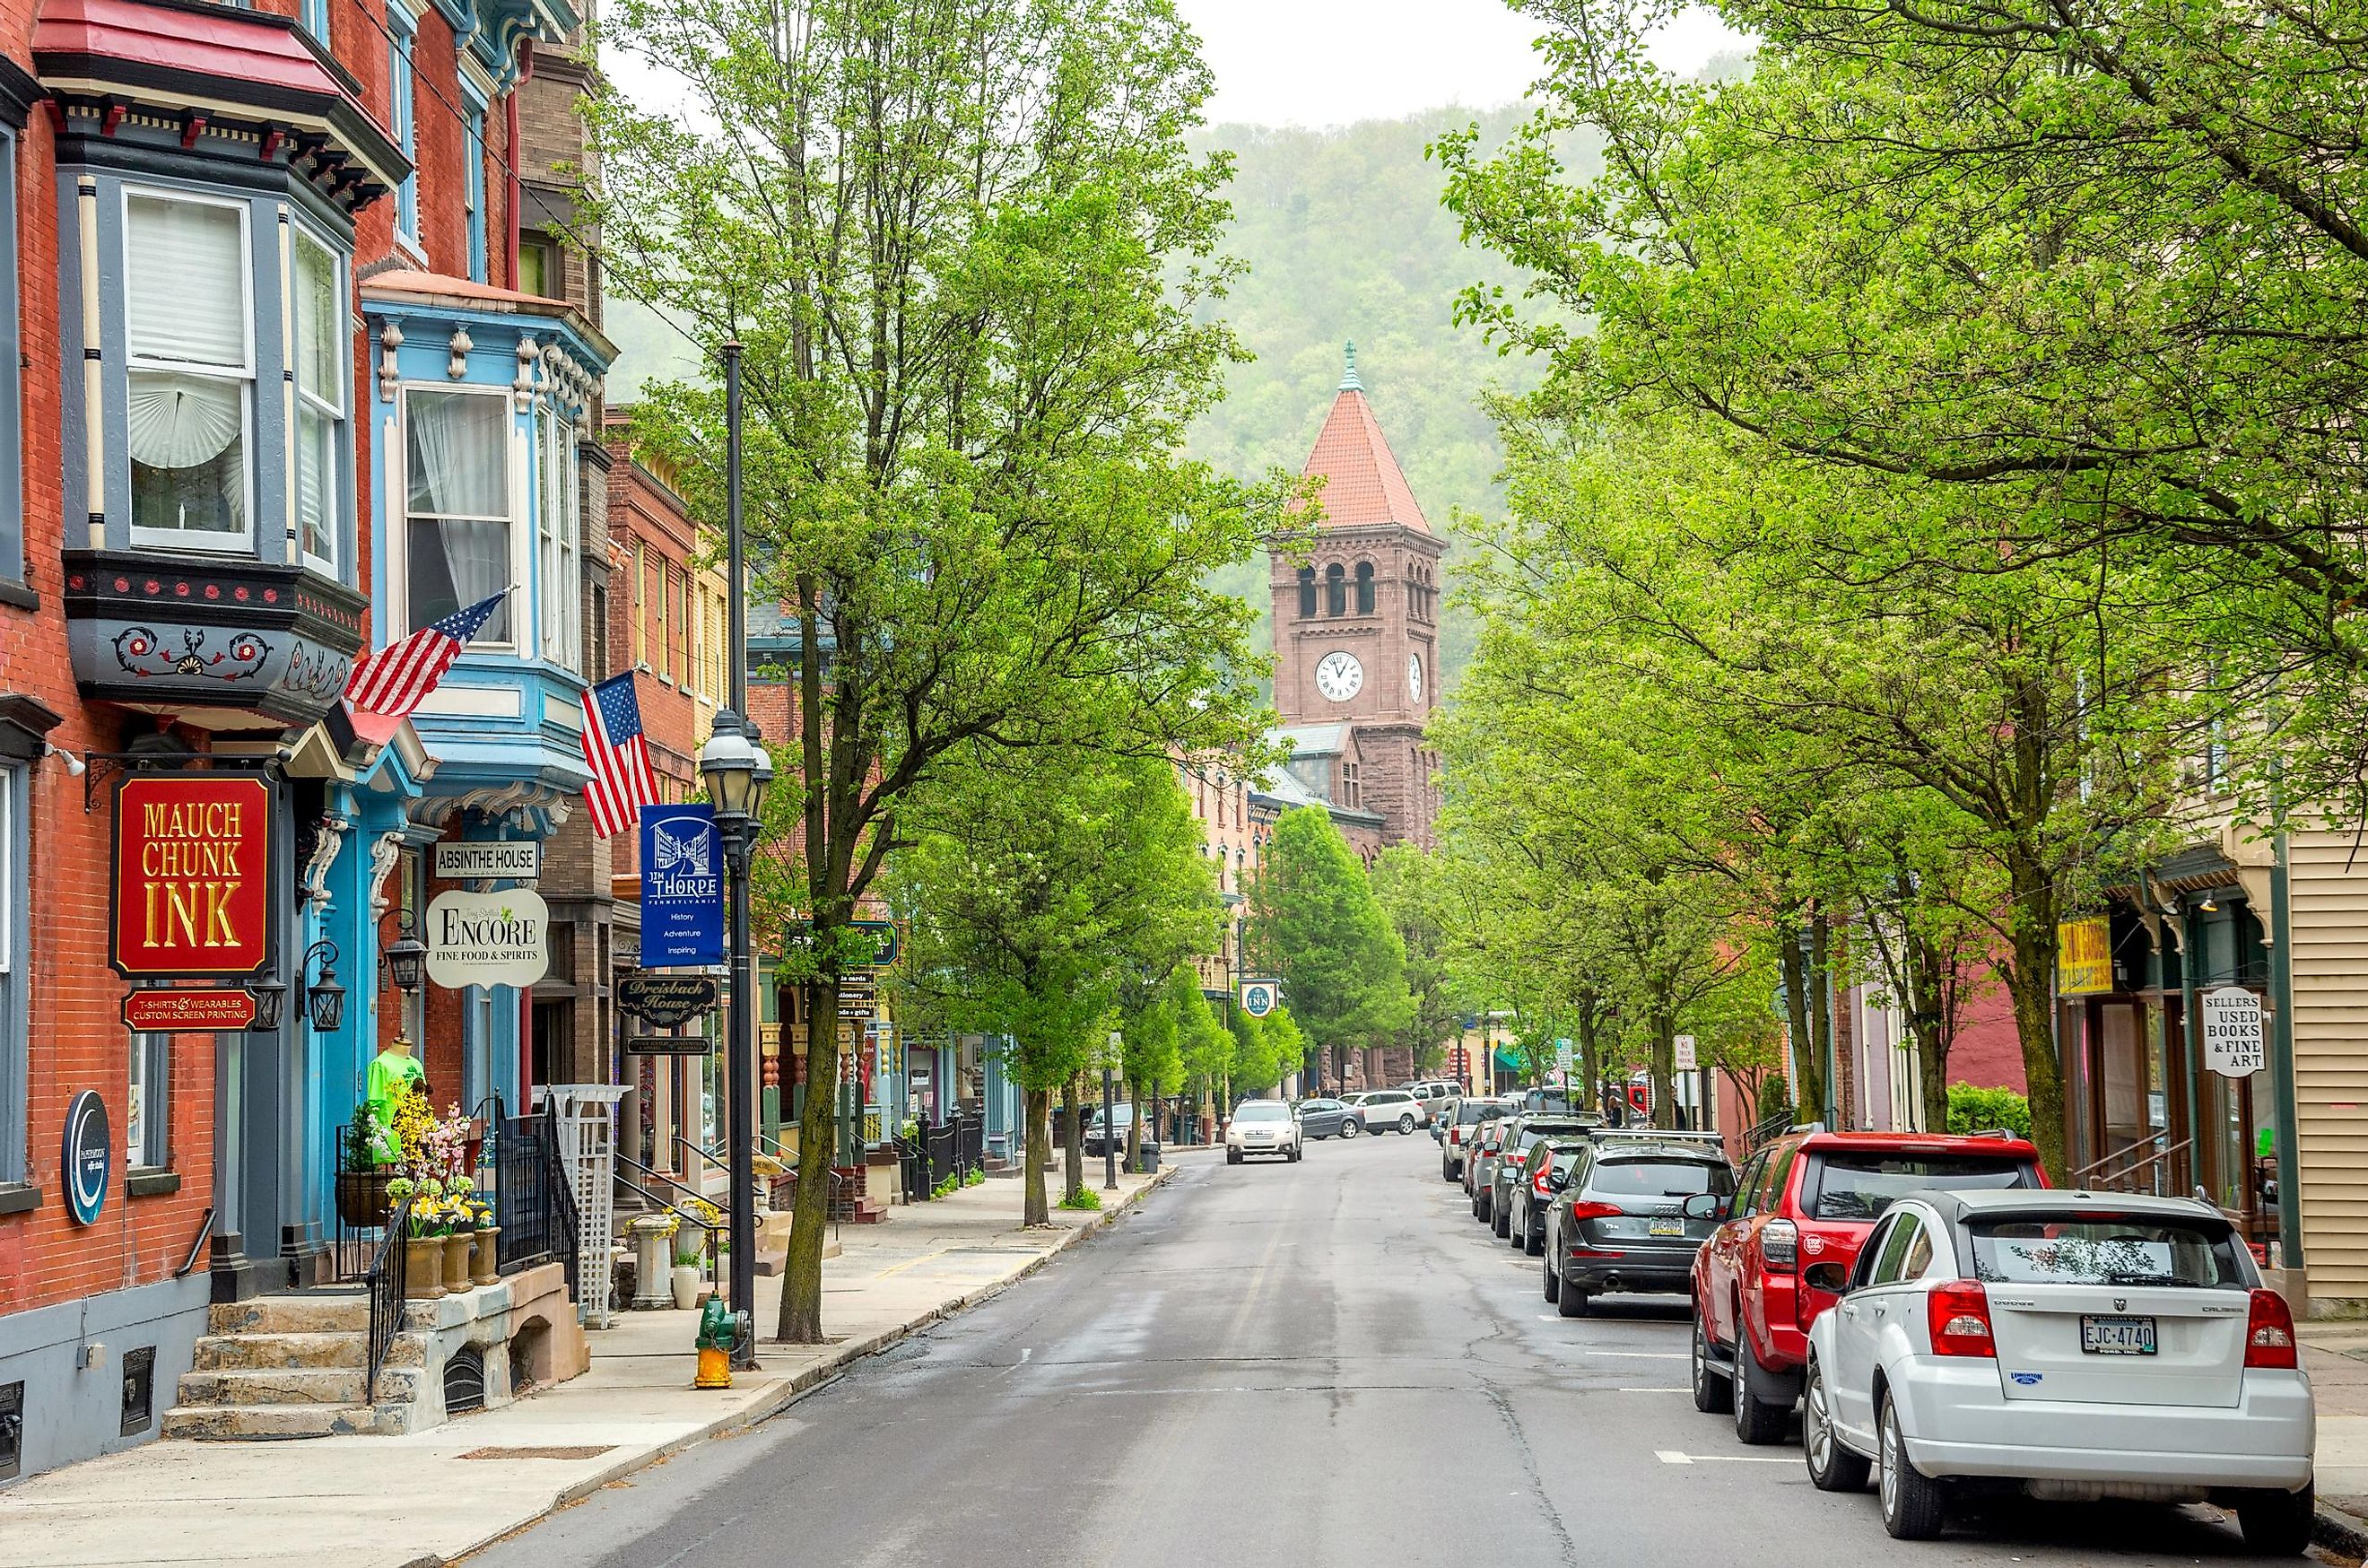 The charming town of Jim Thorpe in the Poconos.